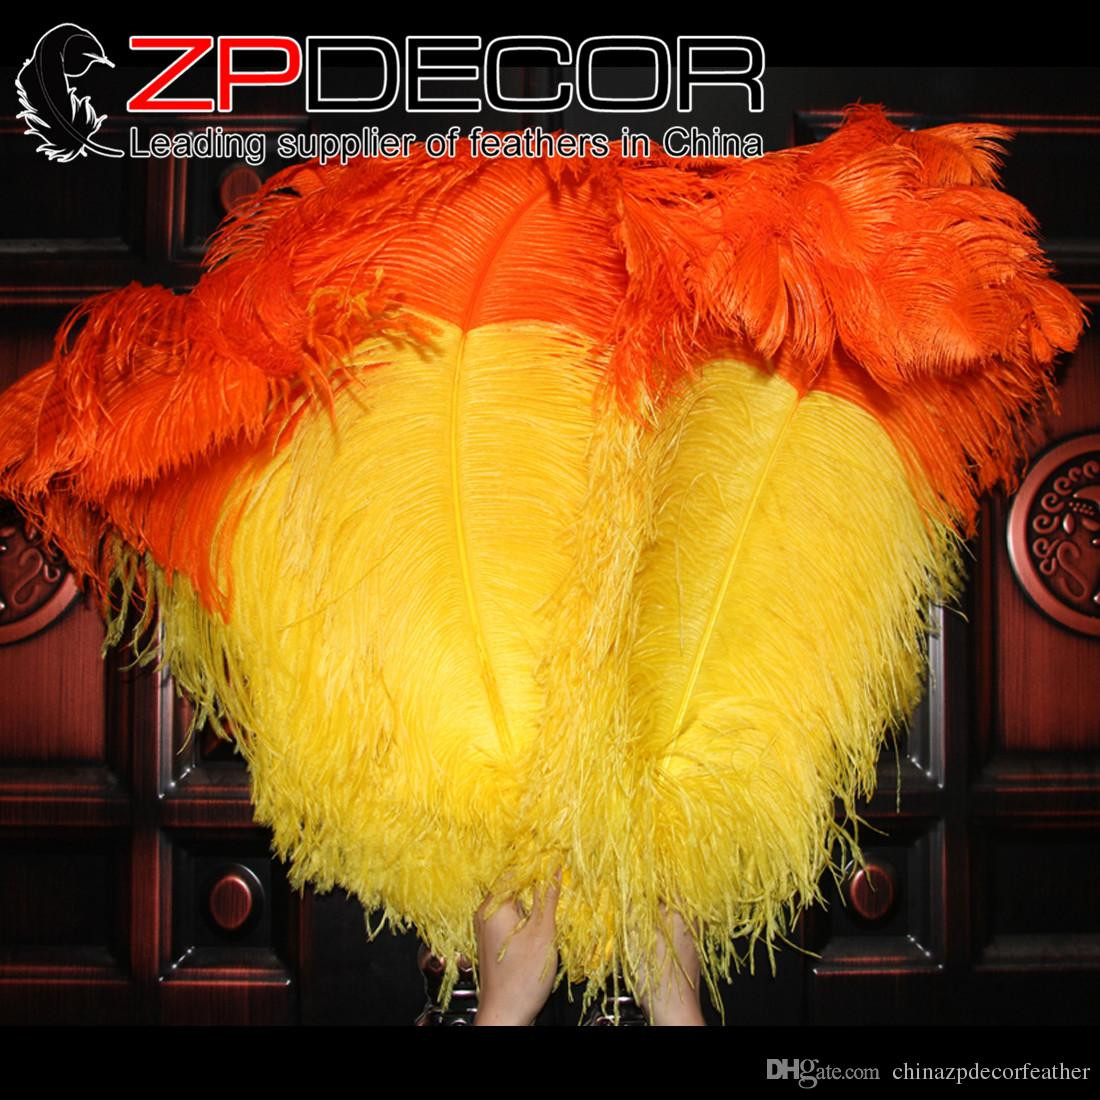 21 Lovable Peacock Feathers In Vase 2024 free download peacock feathers in vase of leading ostrich feathers supplier zpdecor 65 70cm26 28inchgood inside leading ostrich feathers supplier zpdecor 65 70cm26 28inchgood quality dyed yellow tipped or